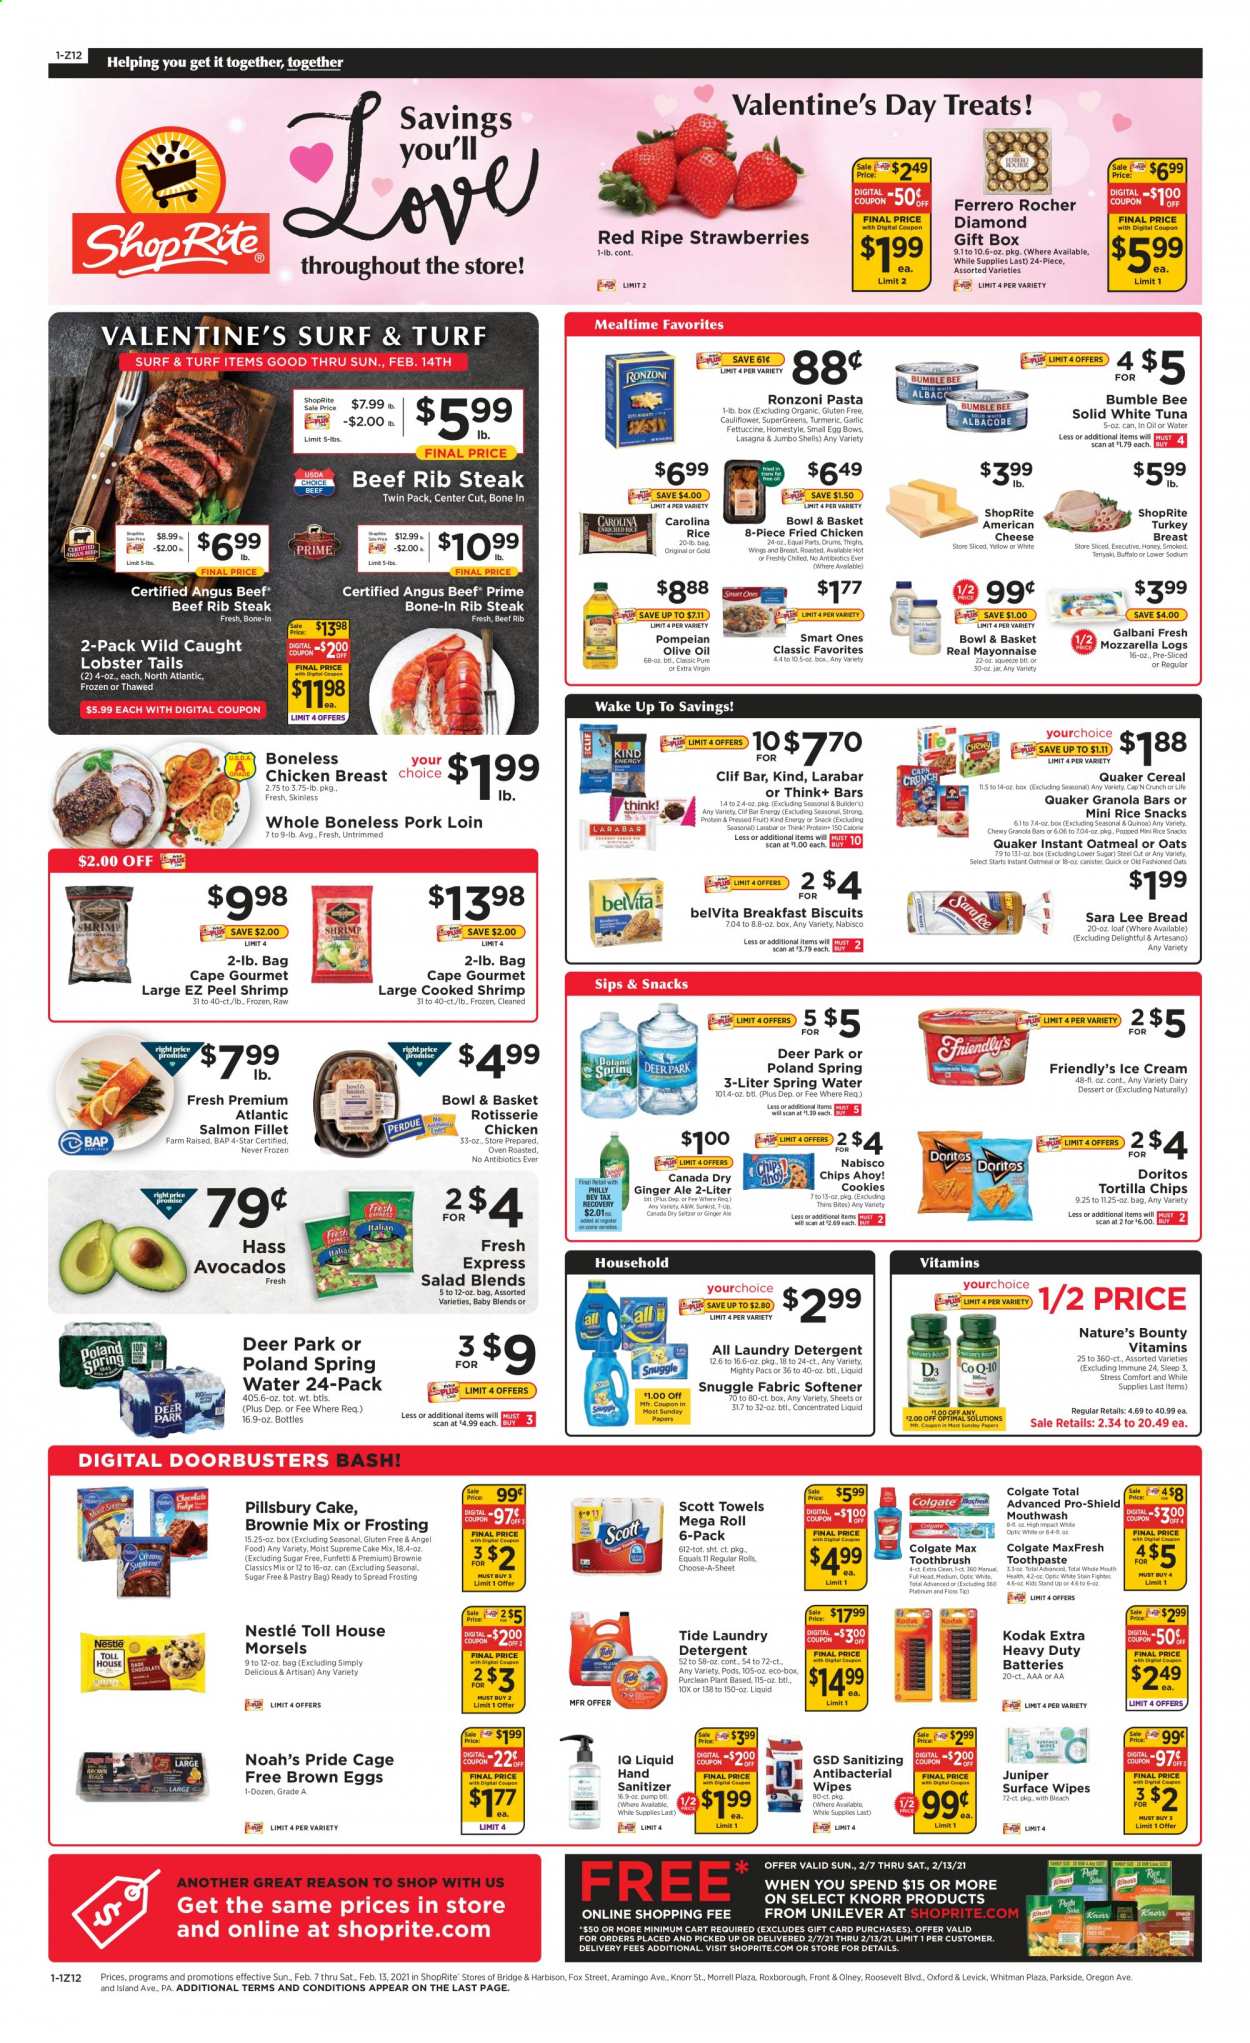 thumbnail - ShopRite Flyer - 02/07/2021 - 02/13/2021 - Sales products - bread, Sara Lee, brownie mix, cake mix, Angel Food, lobster, salmon, salmon fillet, tuna, lobster tail, shrimps, Knorr, salad, fried chicken, Pillsbury, Quaker, lasagna meal, Bowl & Basket, american cheese, mozzarella, cheese, Galbani, eggs, cage free eggs, mayonnaise, ice cream, Friendly's Ice Cream, strawberries, cookies, Nestlé, Ferrero Rocher, Bounty, biscuit, Chips Ahoy!, Doritos, tortilla chips, snack, Thins, frosting, oatmeal, garlic, cereals, granola bar, Cap'n Crunch, belVita, quinoa, rice, pasta, turmeric, teriyaki sauce, extra virgin olive oil, olive oil, honey, Canada Dry, ginger ale, 7UP, A&W, seltzer water, spring water, turkey breast, chicken breasts, beef meat, steak, pork loin, pork meat, detergent, wipes, Snuggle, Tide, fabric softener, bleach, laundry detergent, Surf, Colgate, toothbrush, toothpaste, mouthwash, bowl, gift box, battery, Scott, Nature's Bounty. Page 1.